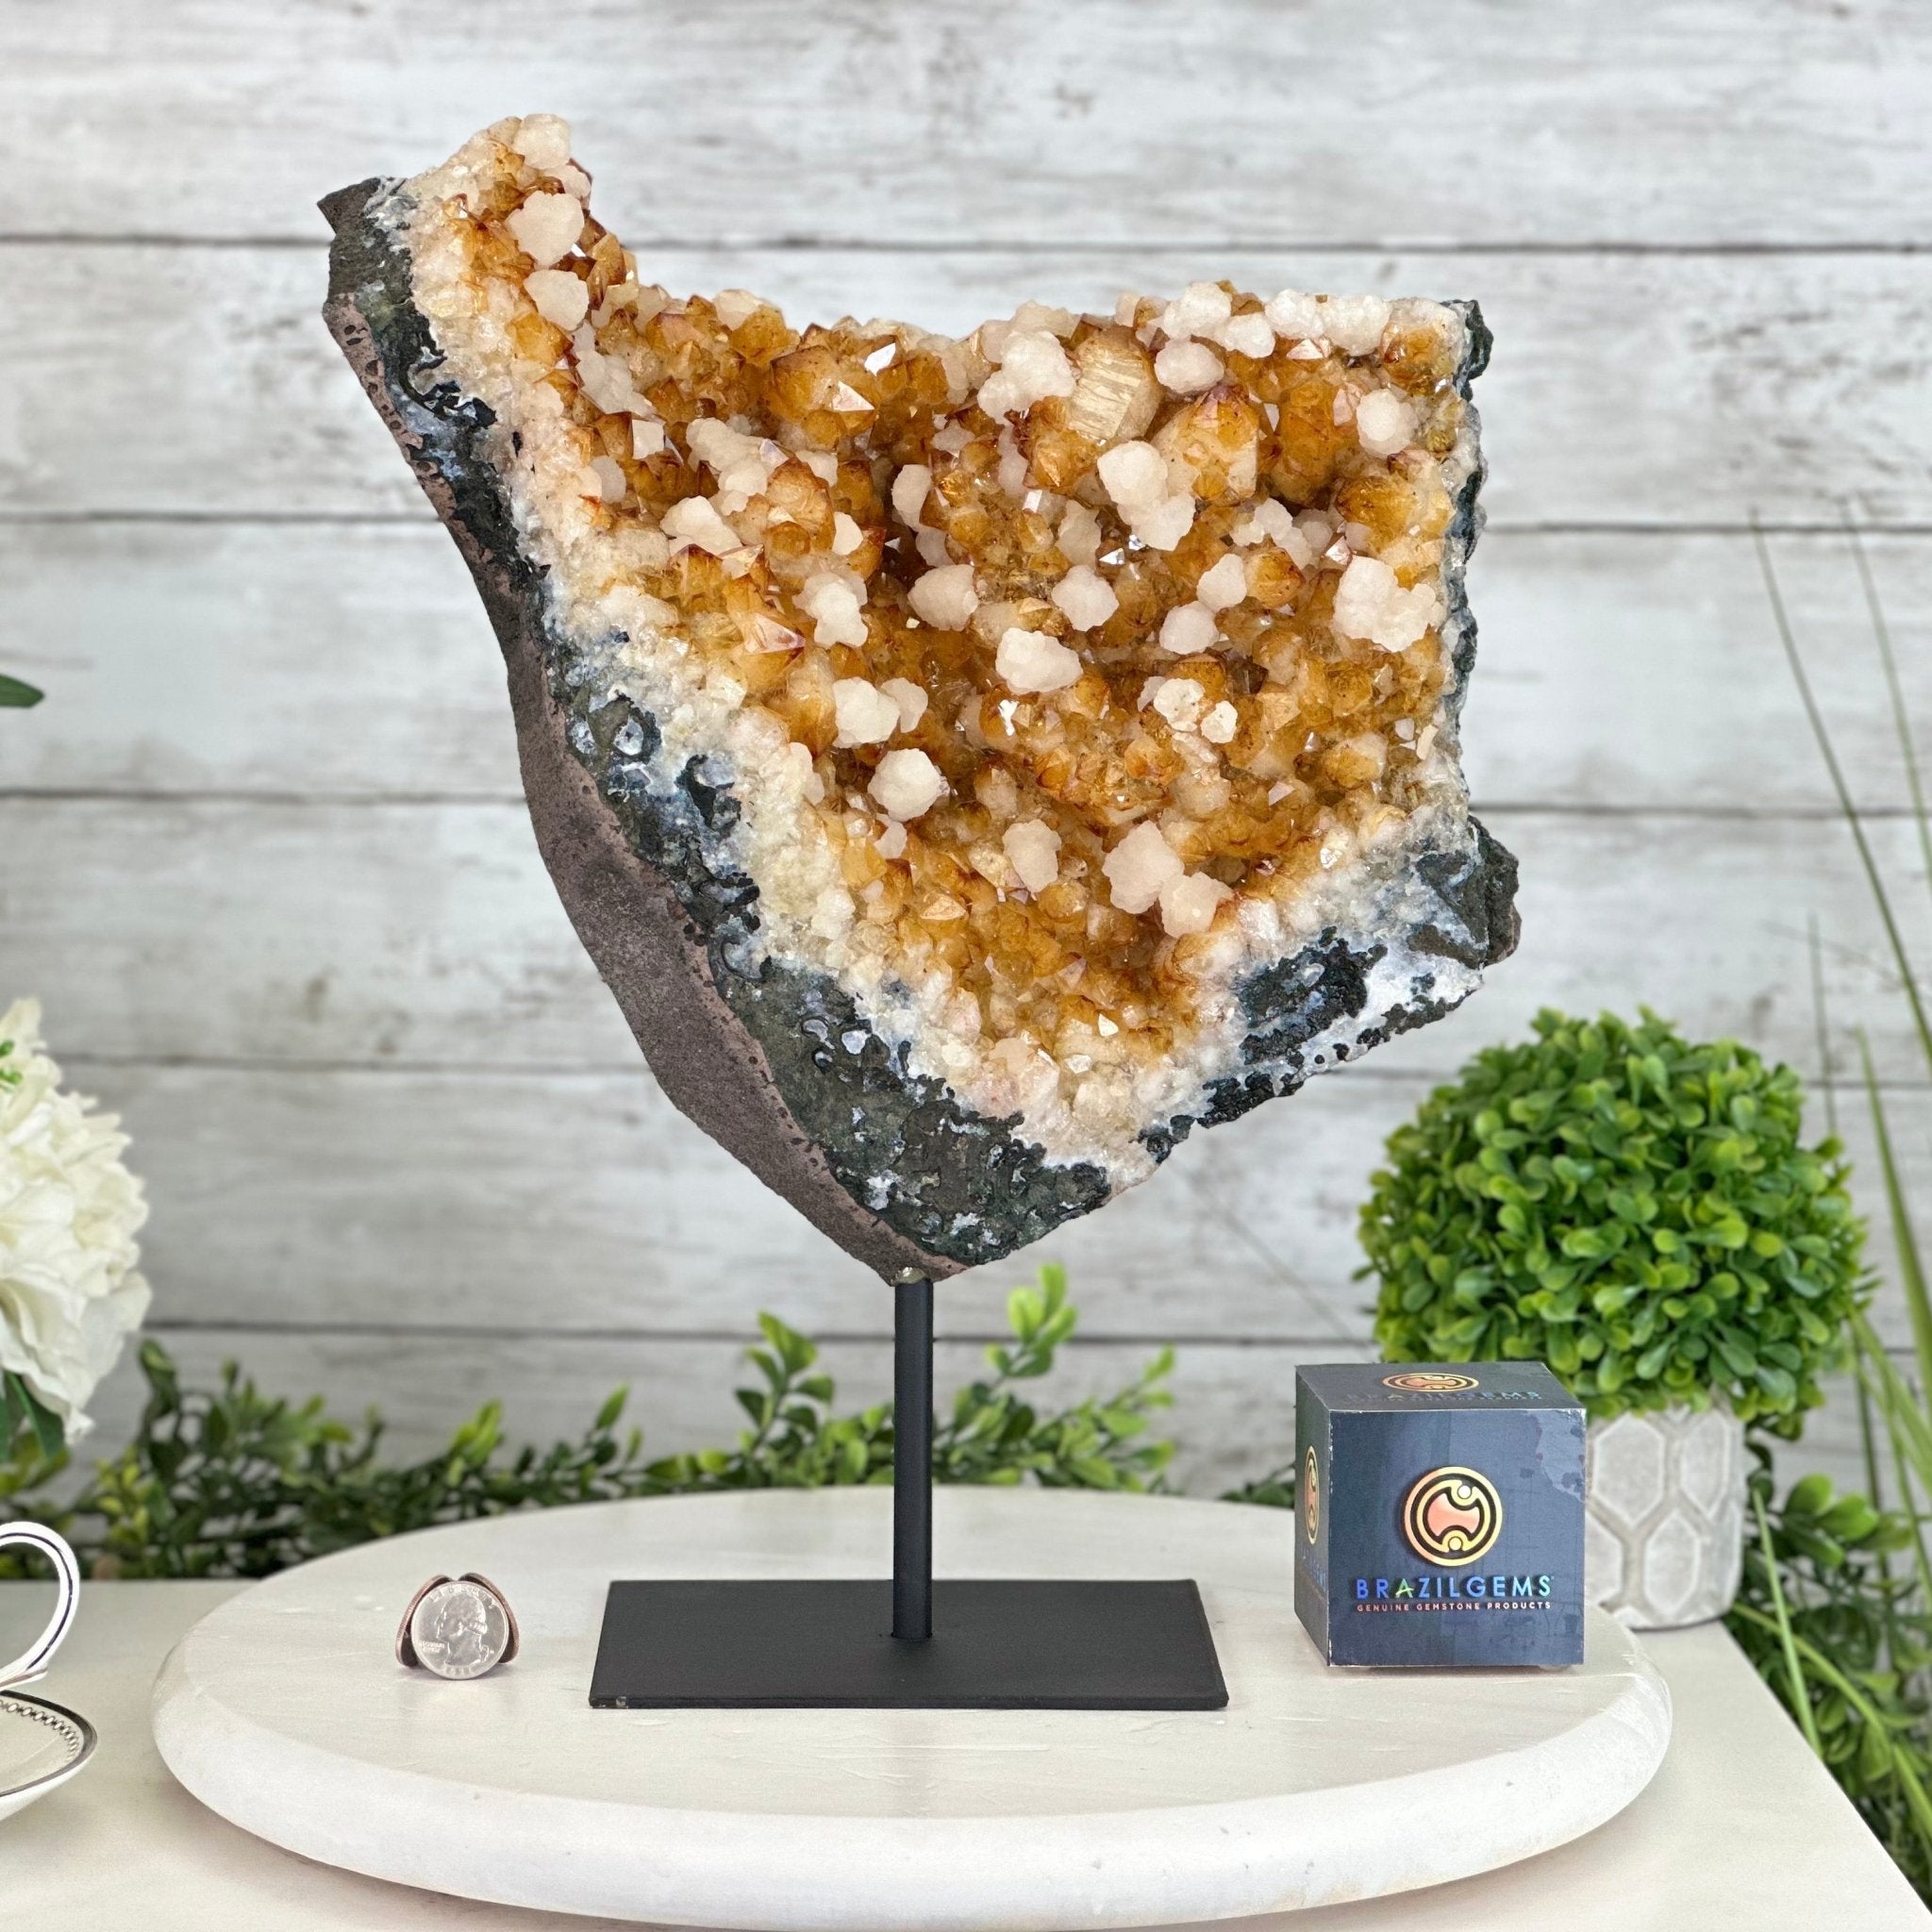 Citrine Crystal Cluster by Brazil Gems®, Metal Stand, 16.8 lbs & 15.1" Tall #5496-0054 - Brazil GemsBrazil GemsCitrine Crystal Cluster by Brazil Gems®, Metal Stand, 16.8 lbs & 15.1" Tall #5496-0054Clusters on Fixed Bases5496-0054